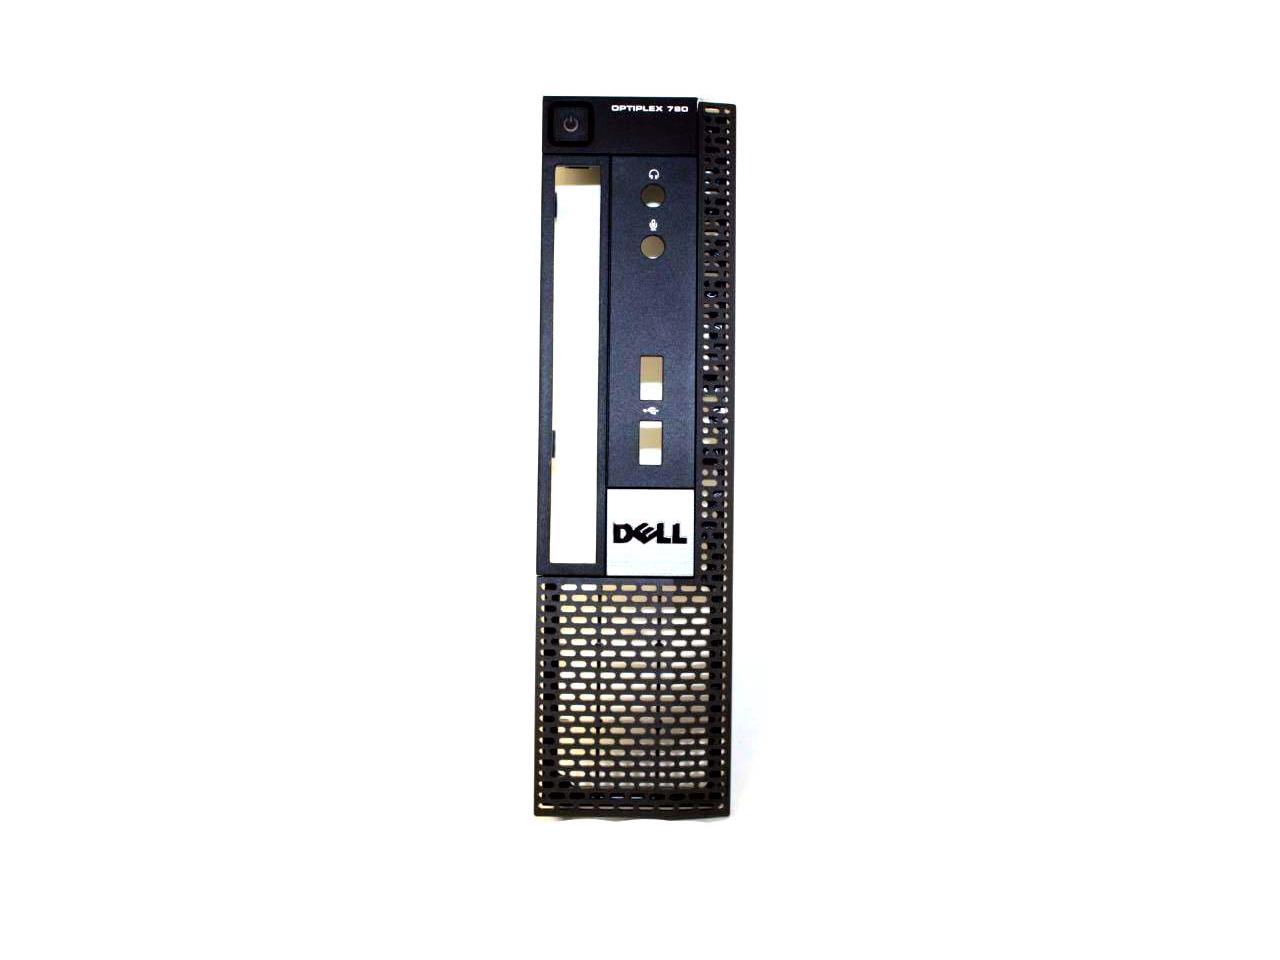 DELL OptiPlex 7040 MT Mini Tower Chassis Front Cover Panel Bezel P9Y6G 0P9Y6G 